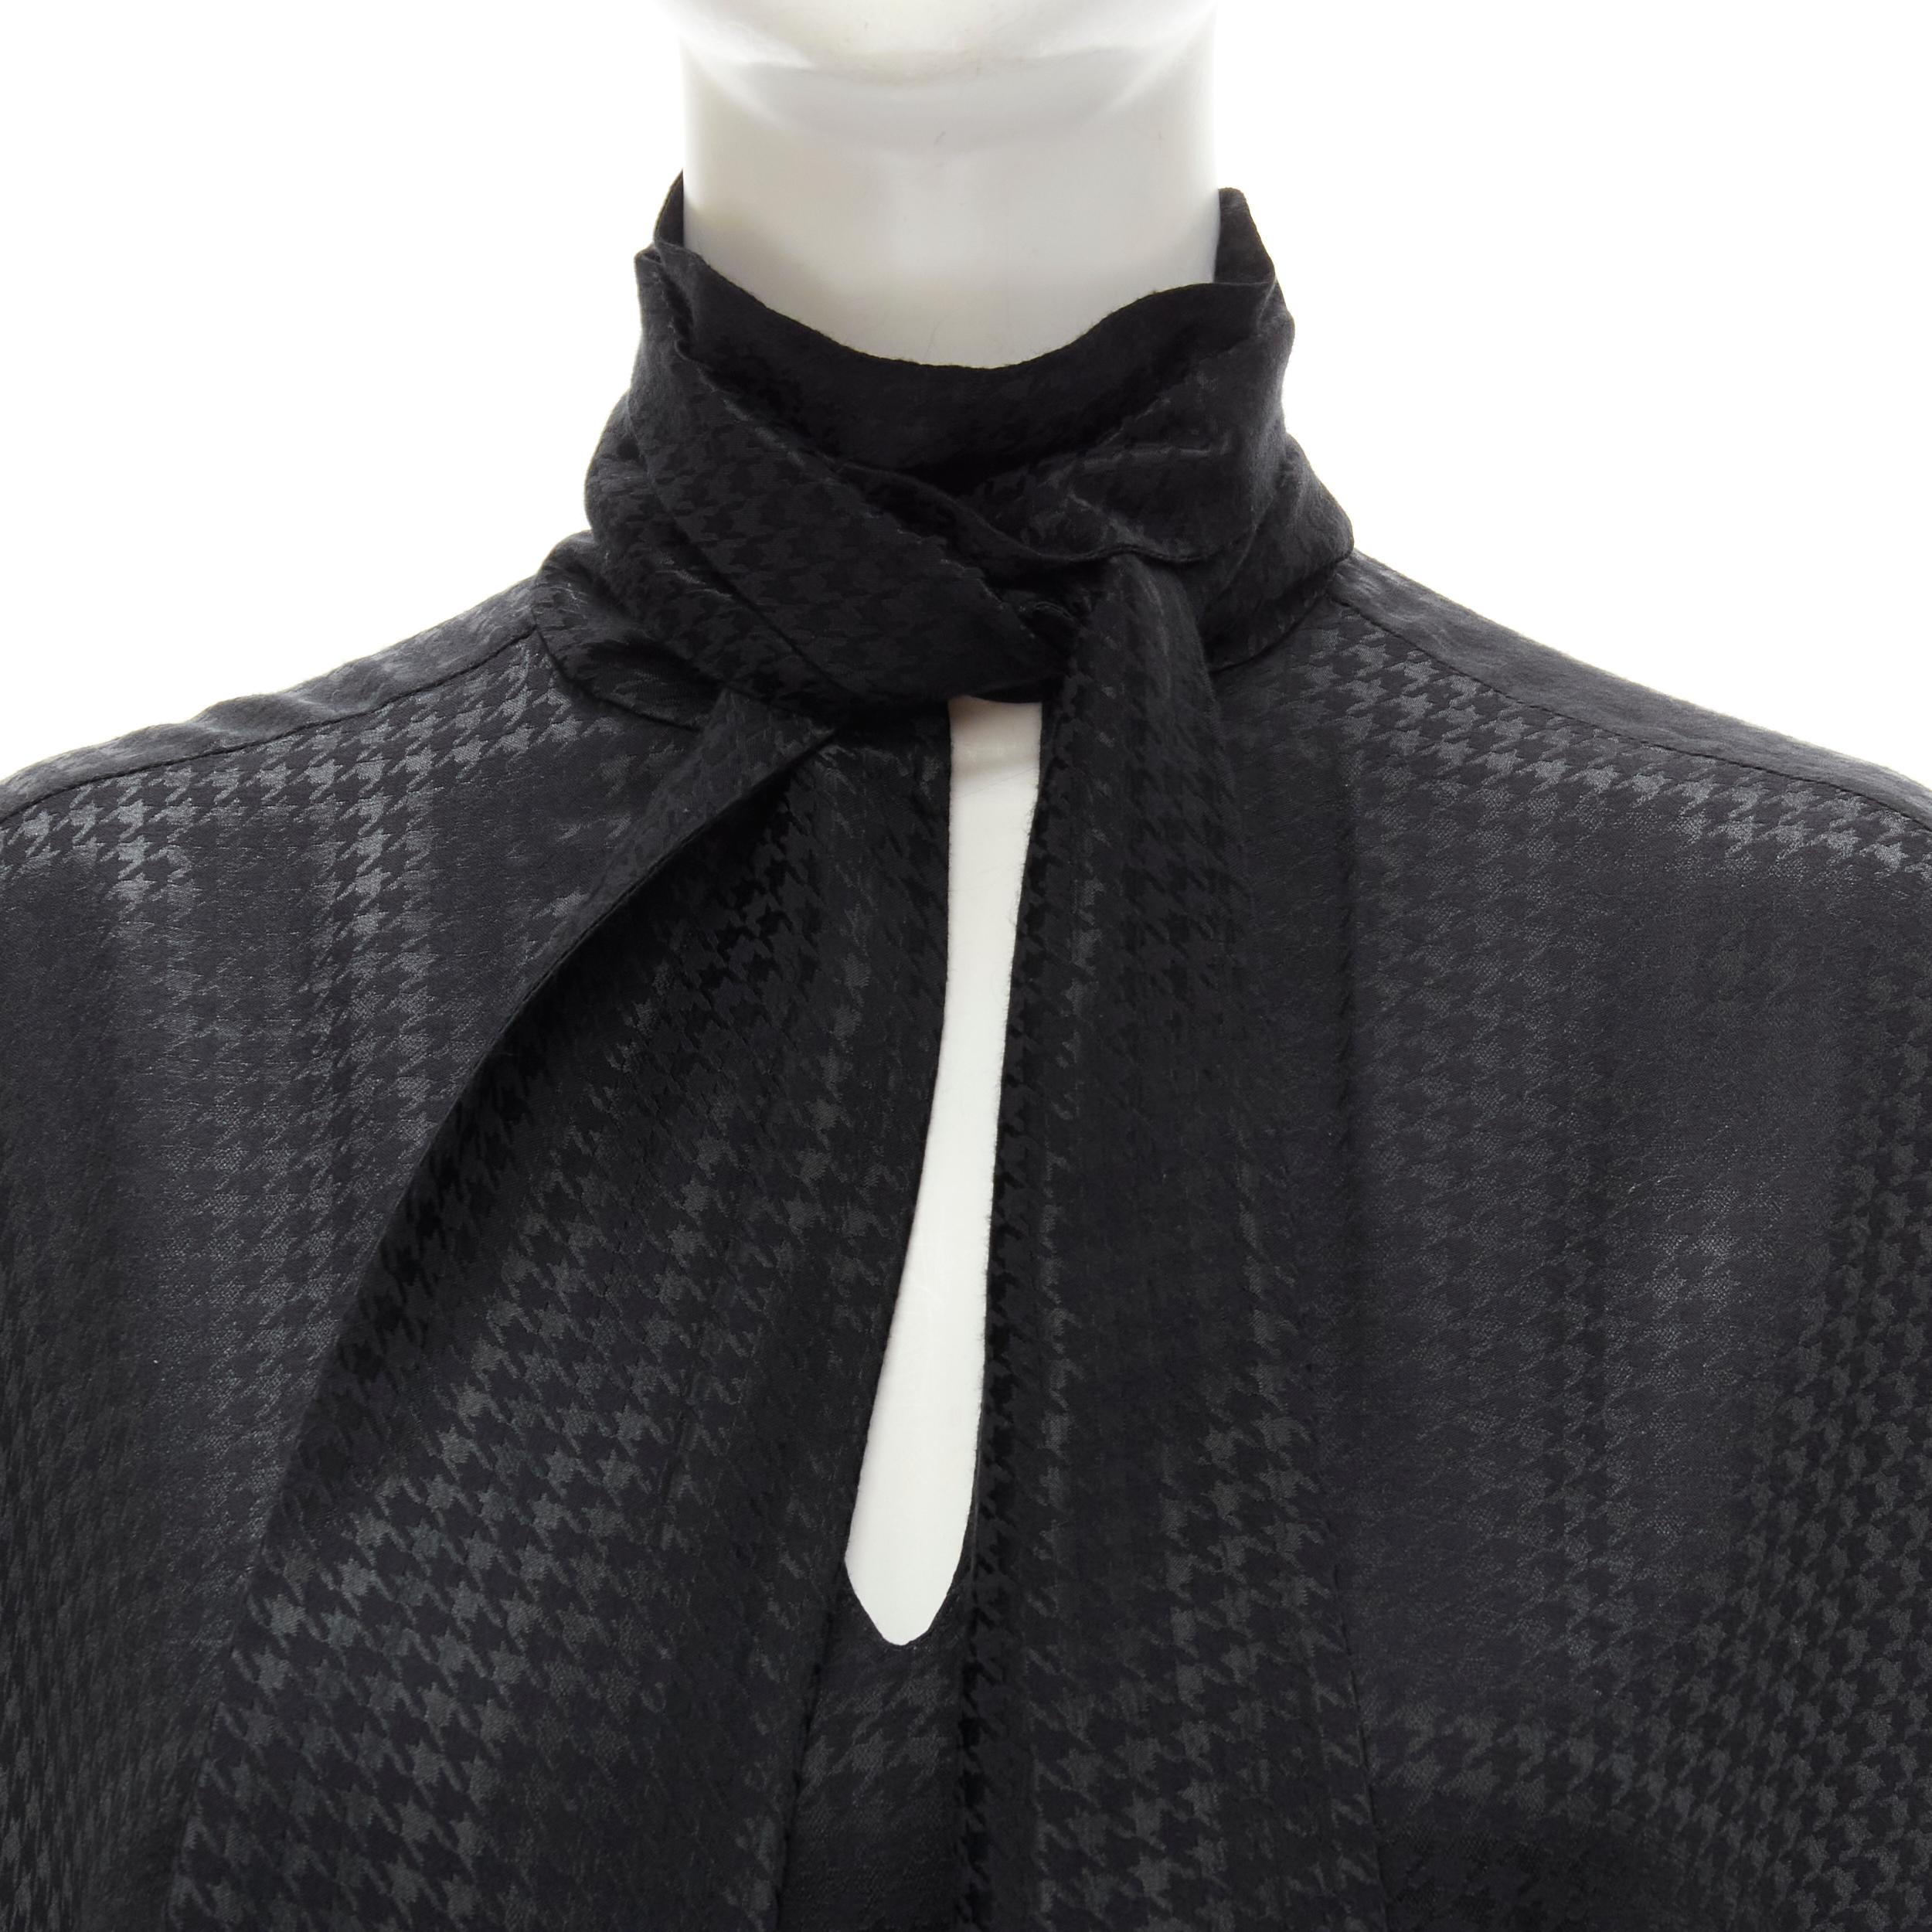 BALENCIAGA DEMNA 2020 black acetate crepe tie neck oversized blouse FR36 S 
Reference: KEDG/A00152 
Brand: Balenciaga 
Designer: Demna 
Collection: 2020 
Material: Viscose 
Color: Black 
Pattern: Houndstooth 
Extra Detail: Tie neck pussy bow.